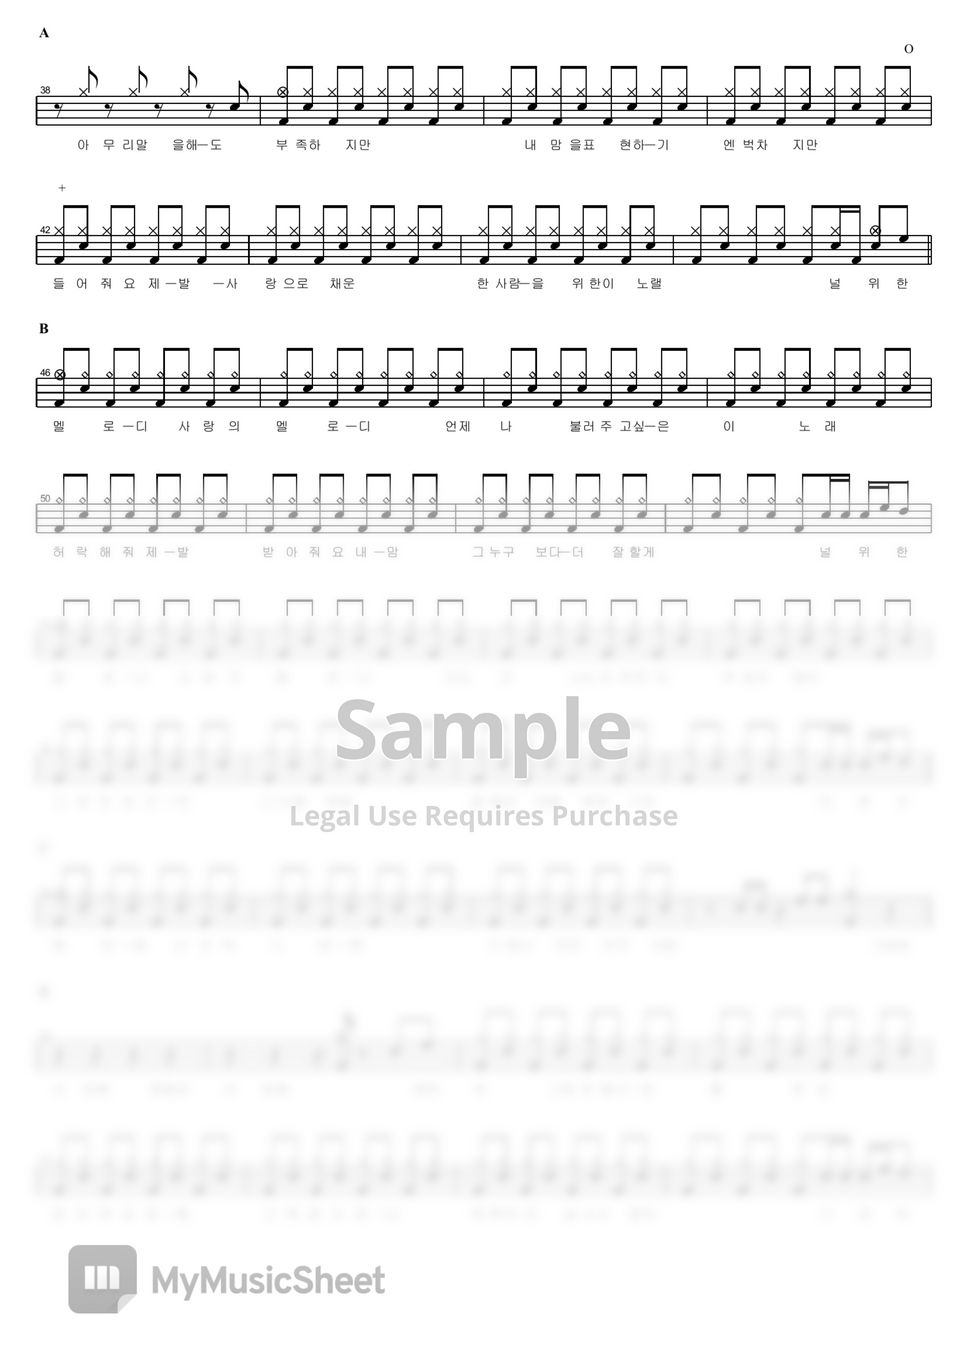 M4 - 널 위한 멜로디 Sheets By Copydrum